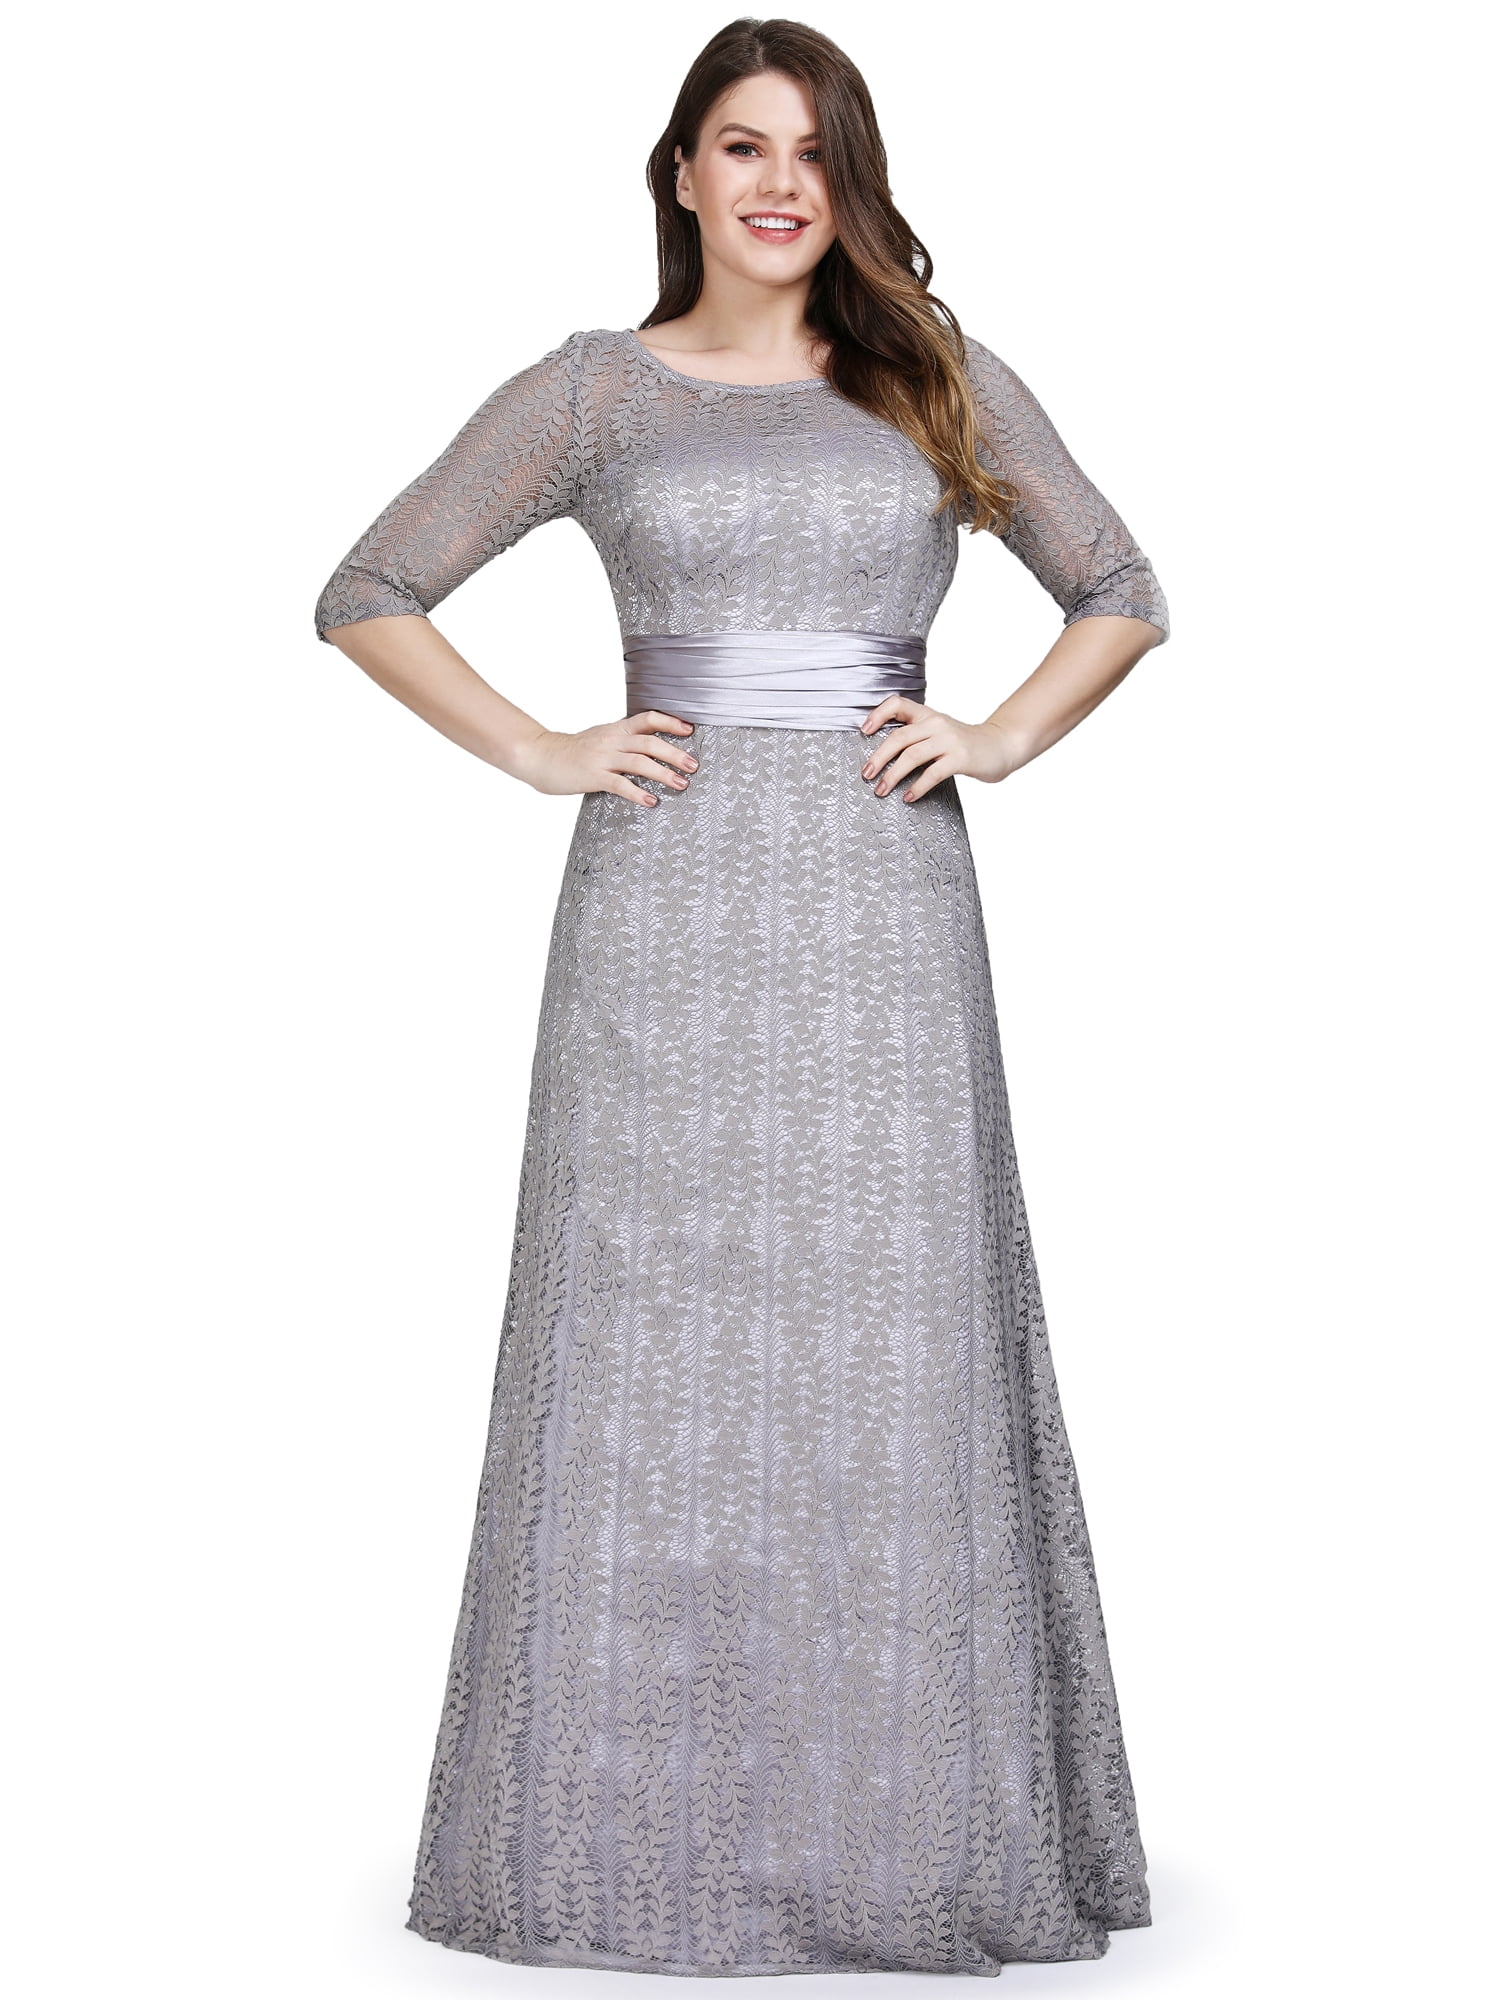 Mother of The Bride Dresses Half Sleeve Lace Formal Evening Dress Plus Size 